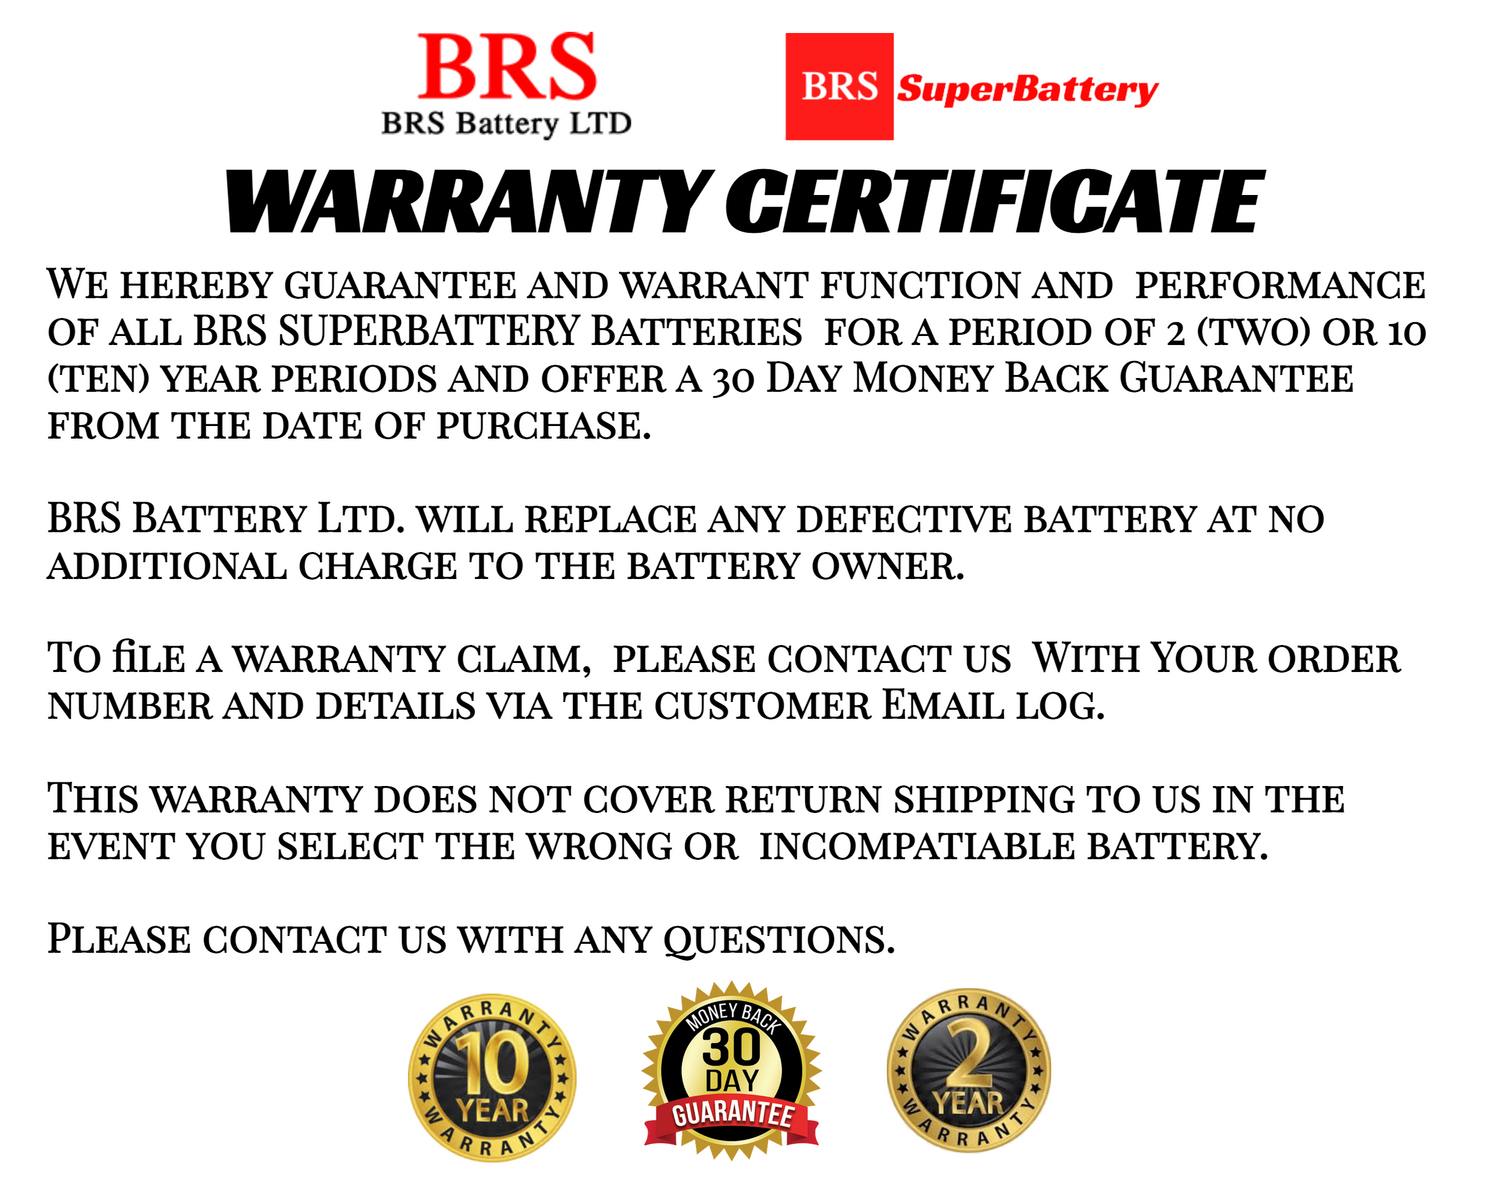 BRS30L-BS 30 Day Warranty Battery & Smart Charger / Maintainer Combo Bundle Kit - BRS Super Battery